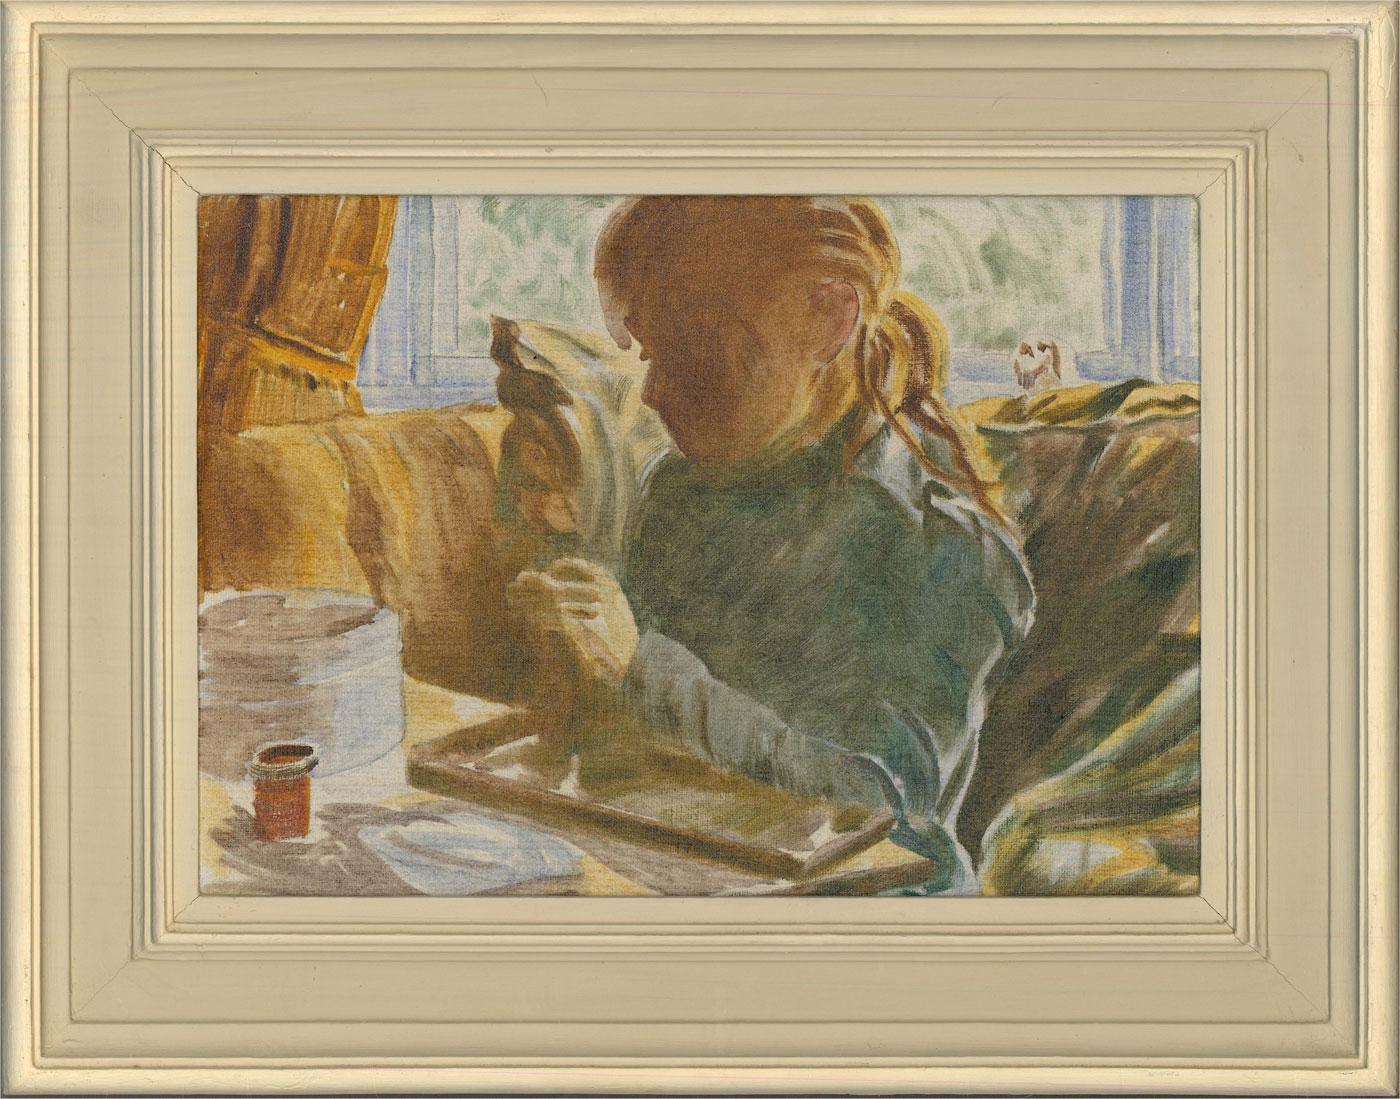 A delightful oil painting, depicting a young girl threading beads in an interior setting. There is an 'Armed Forces Art Society' label on the revere. The title and artist's name are also inscribed on the revere. Unsigned. Presented in an off-white